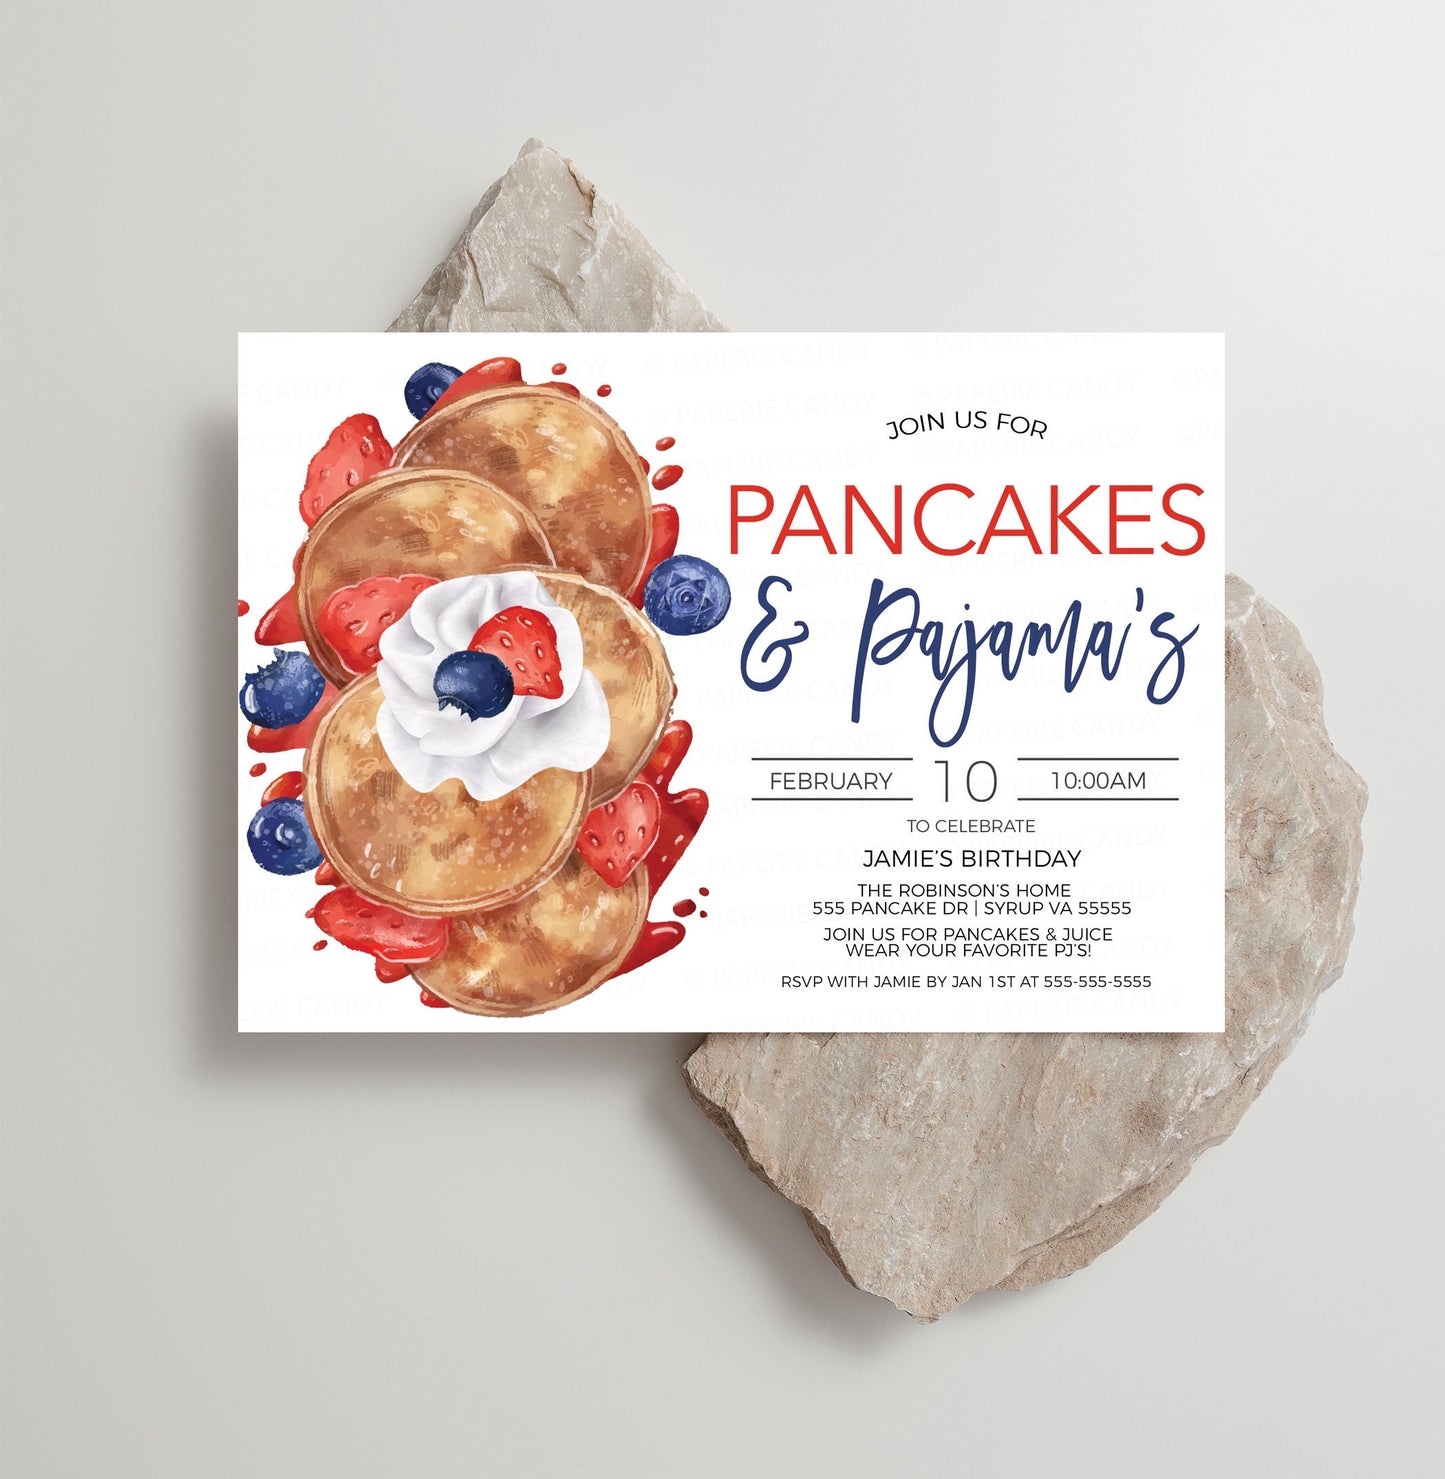 Pancakes And Pajamas Invitation, Pancake PJ Party Invite, Birthday Breakfast Brunch Kids Party, 4th Of July Labor Day, Editable Printable